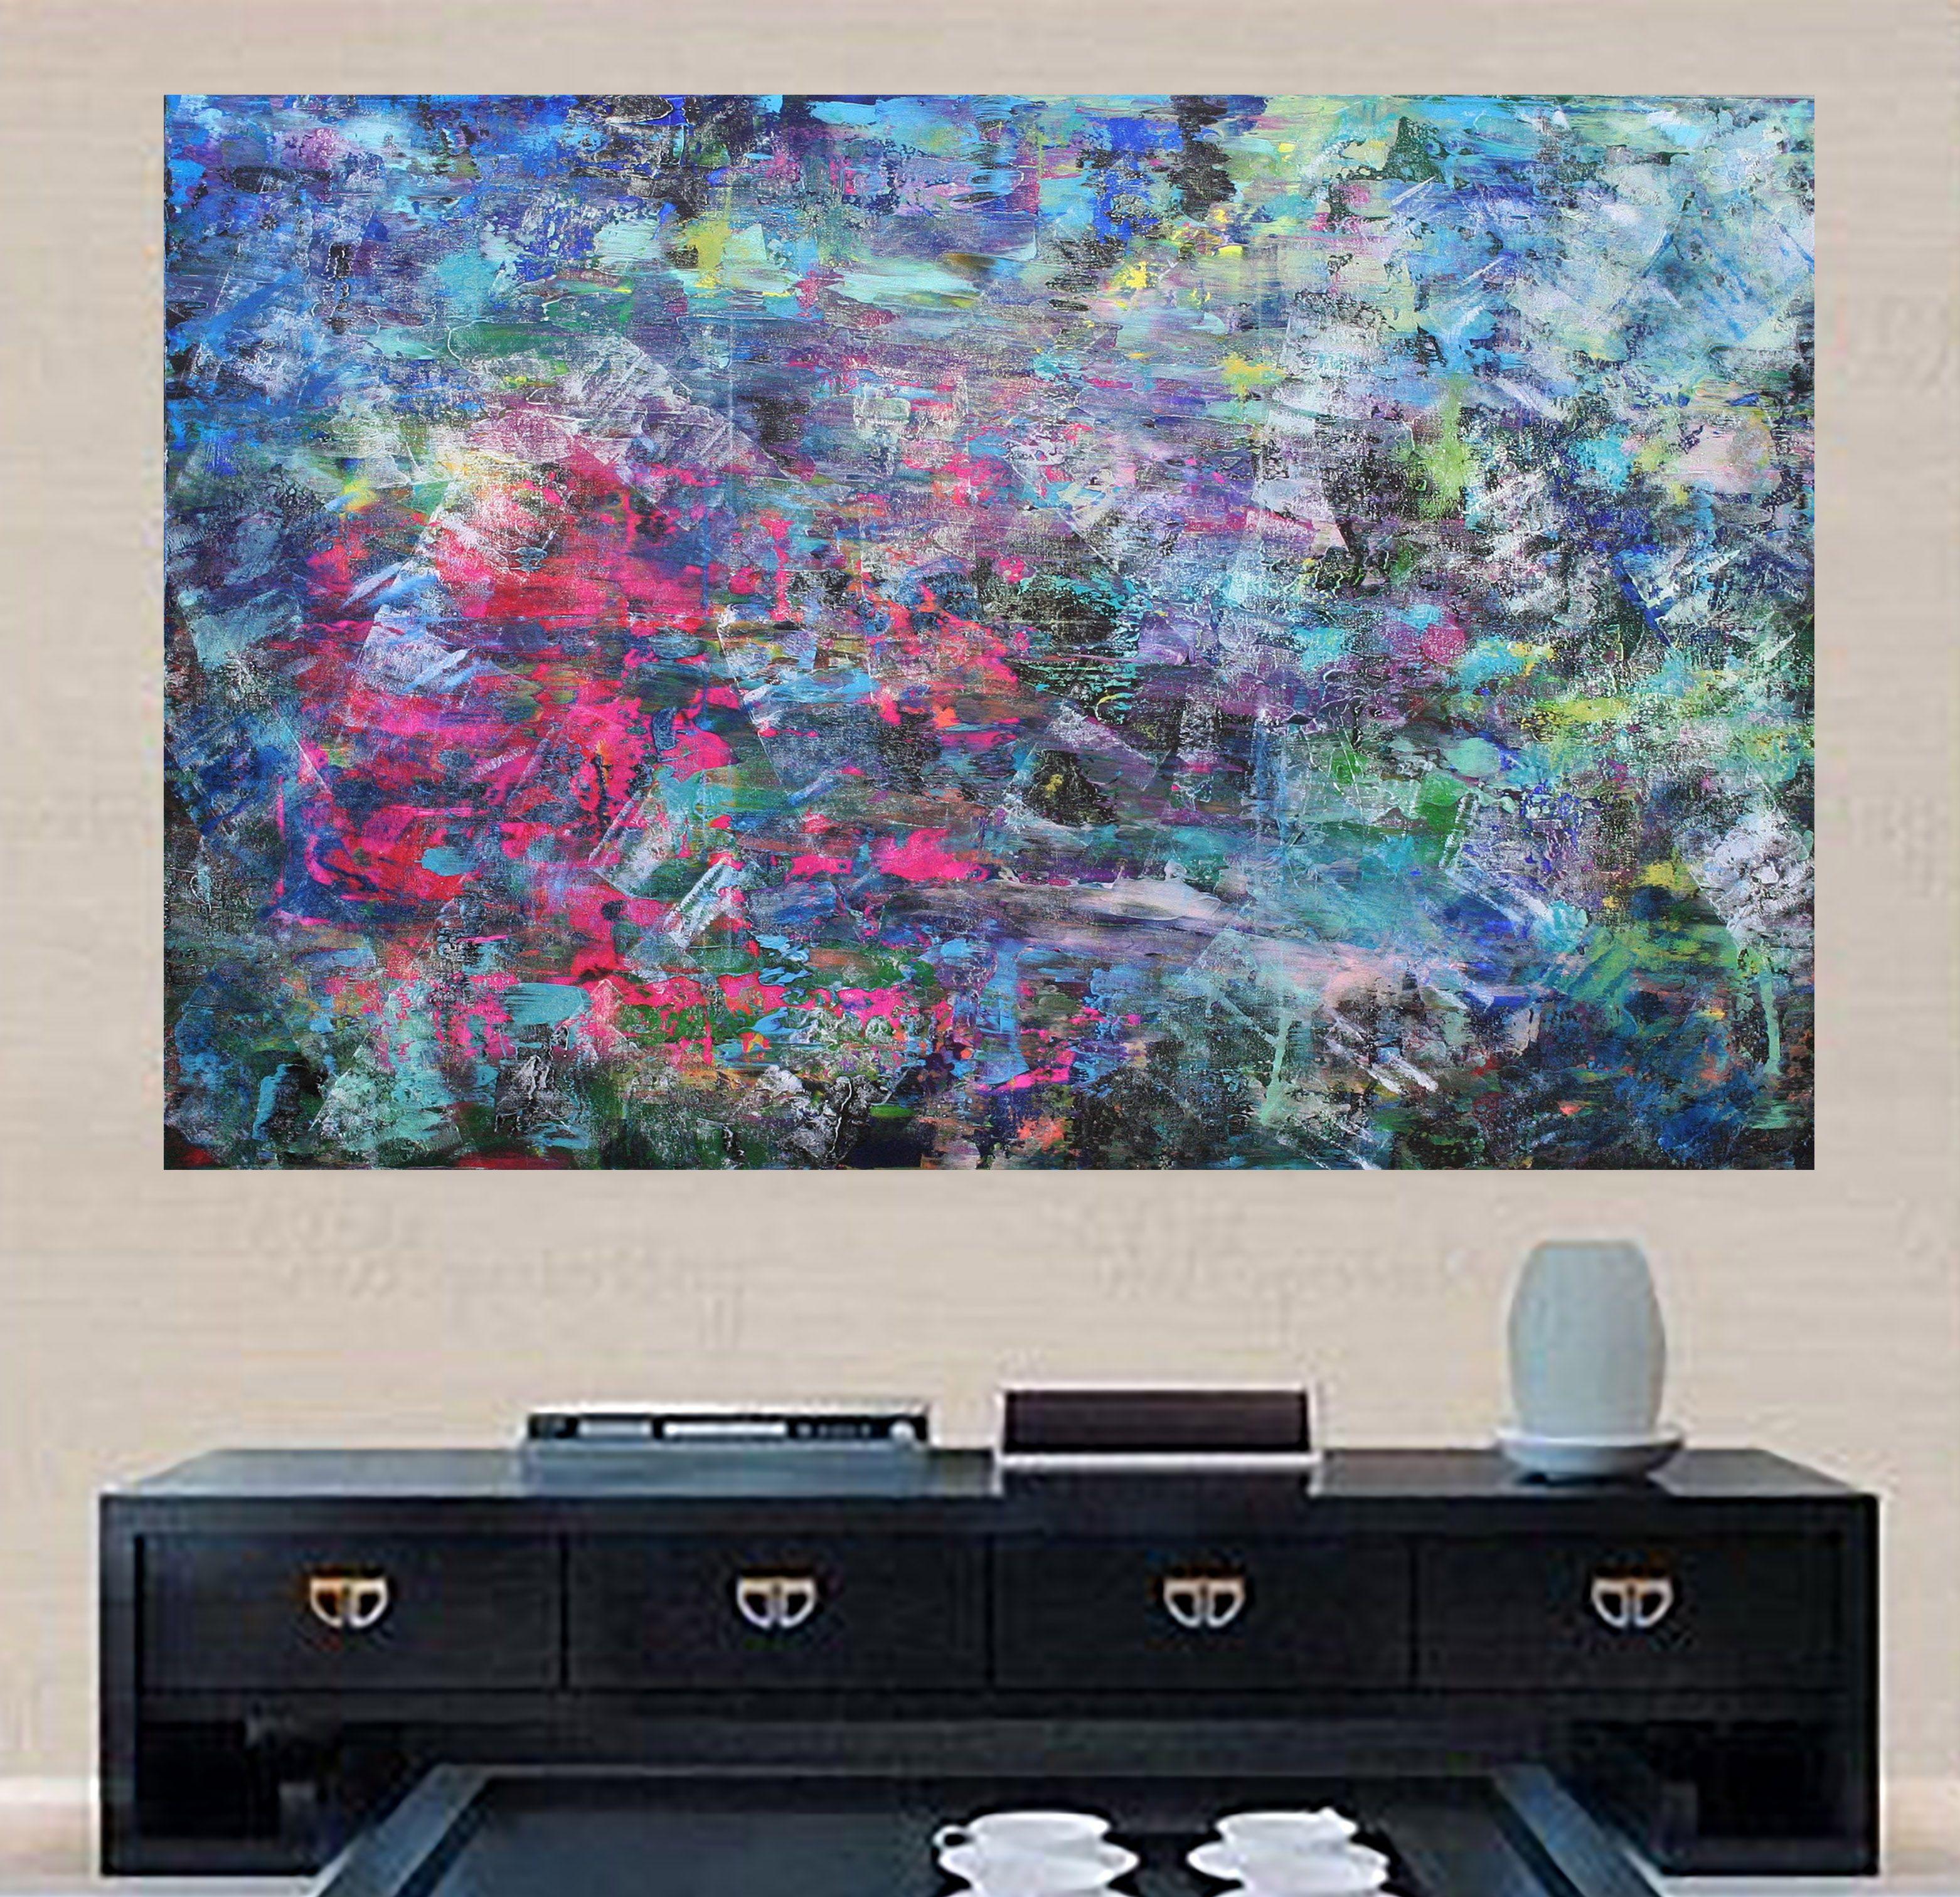 XXXL Spectral Distortion 150 x 100cm Abstract, Painting, Acrylic on Canvas - Gray Abstract Painting by Susan Wooler